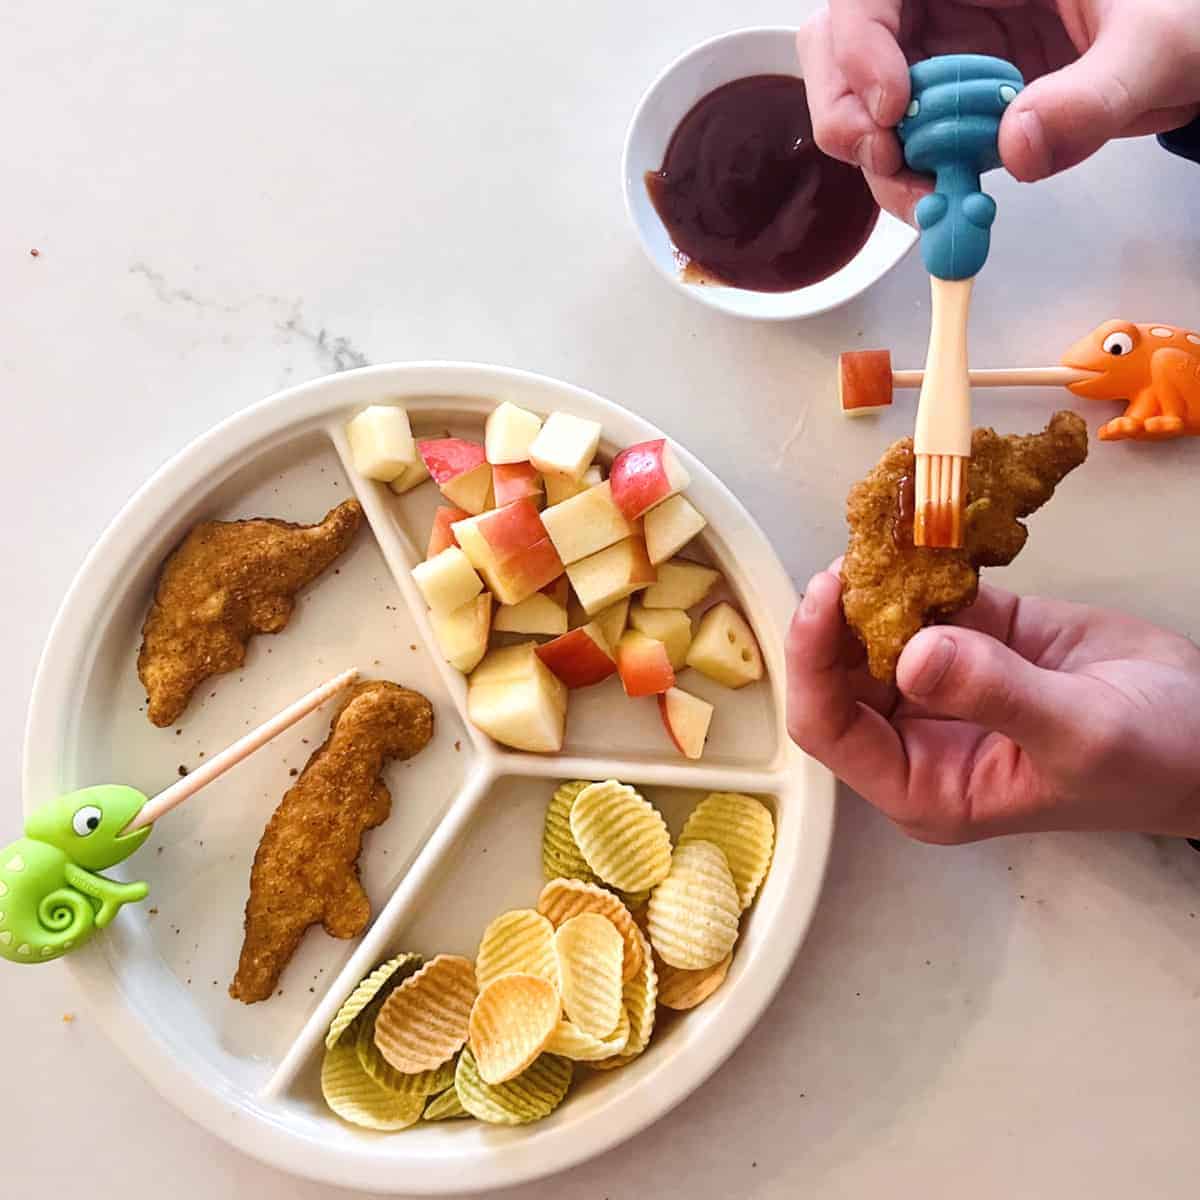 Dabbldoo Review: Fun Tools to Help Kids Eat New Foods